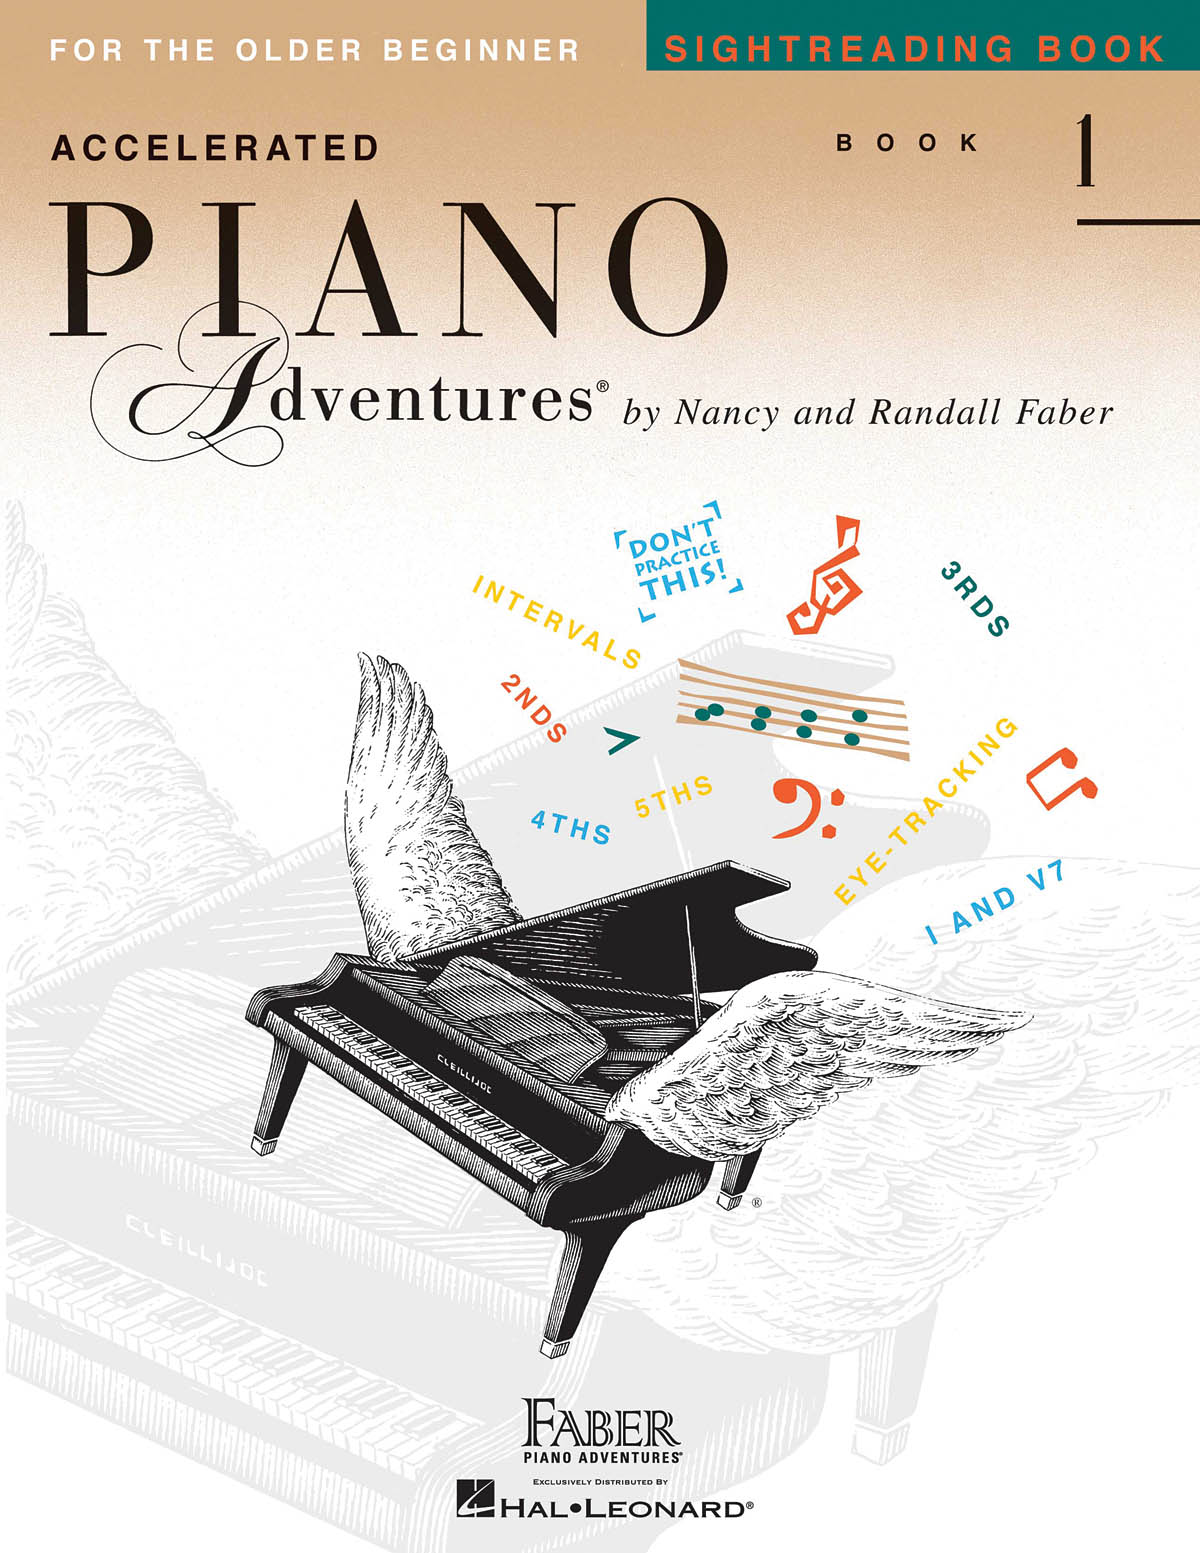 Nancy Faber Randall Faber: Accelerated Piano Adventures Sightreading Book 1: